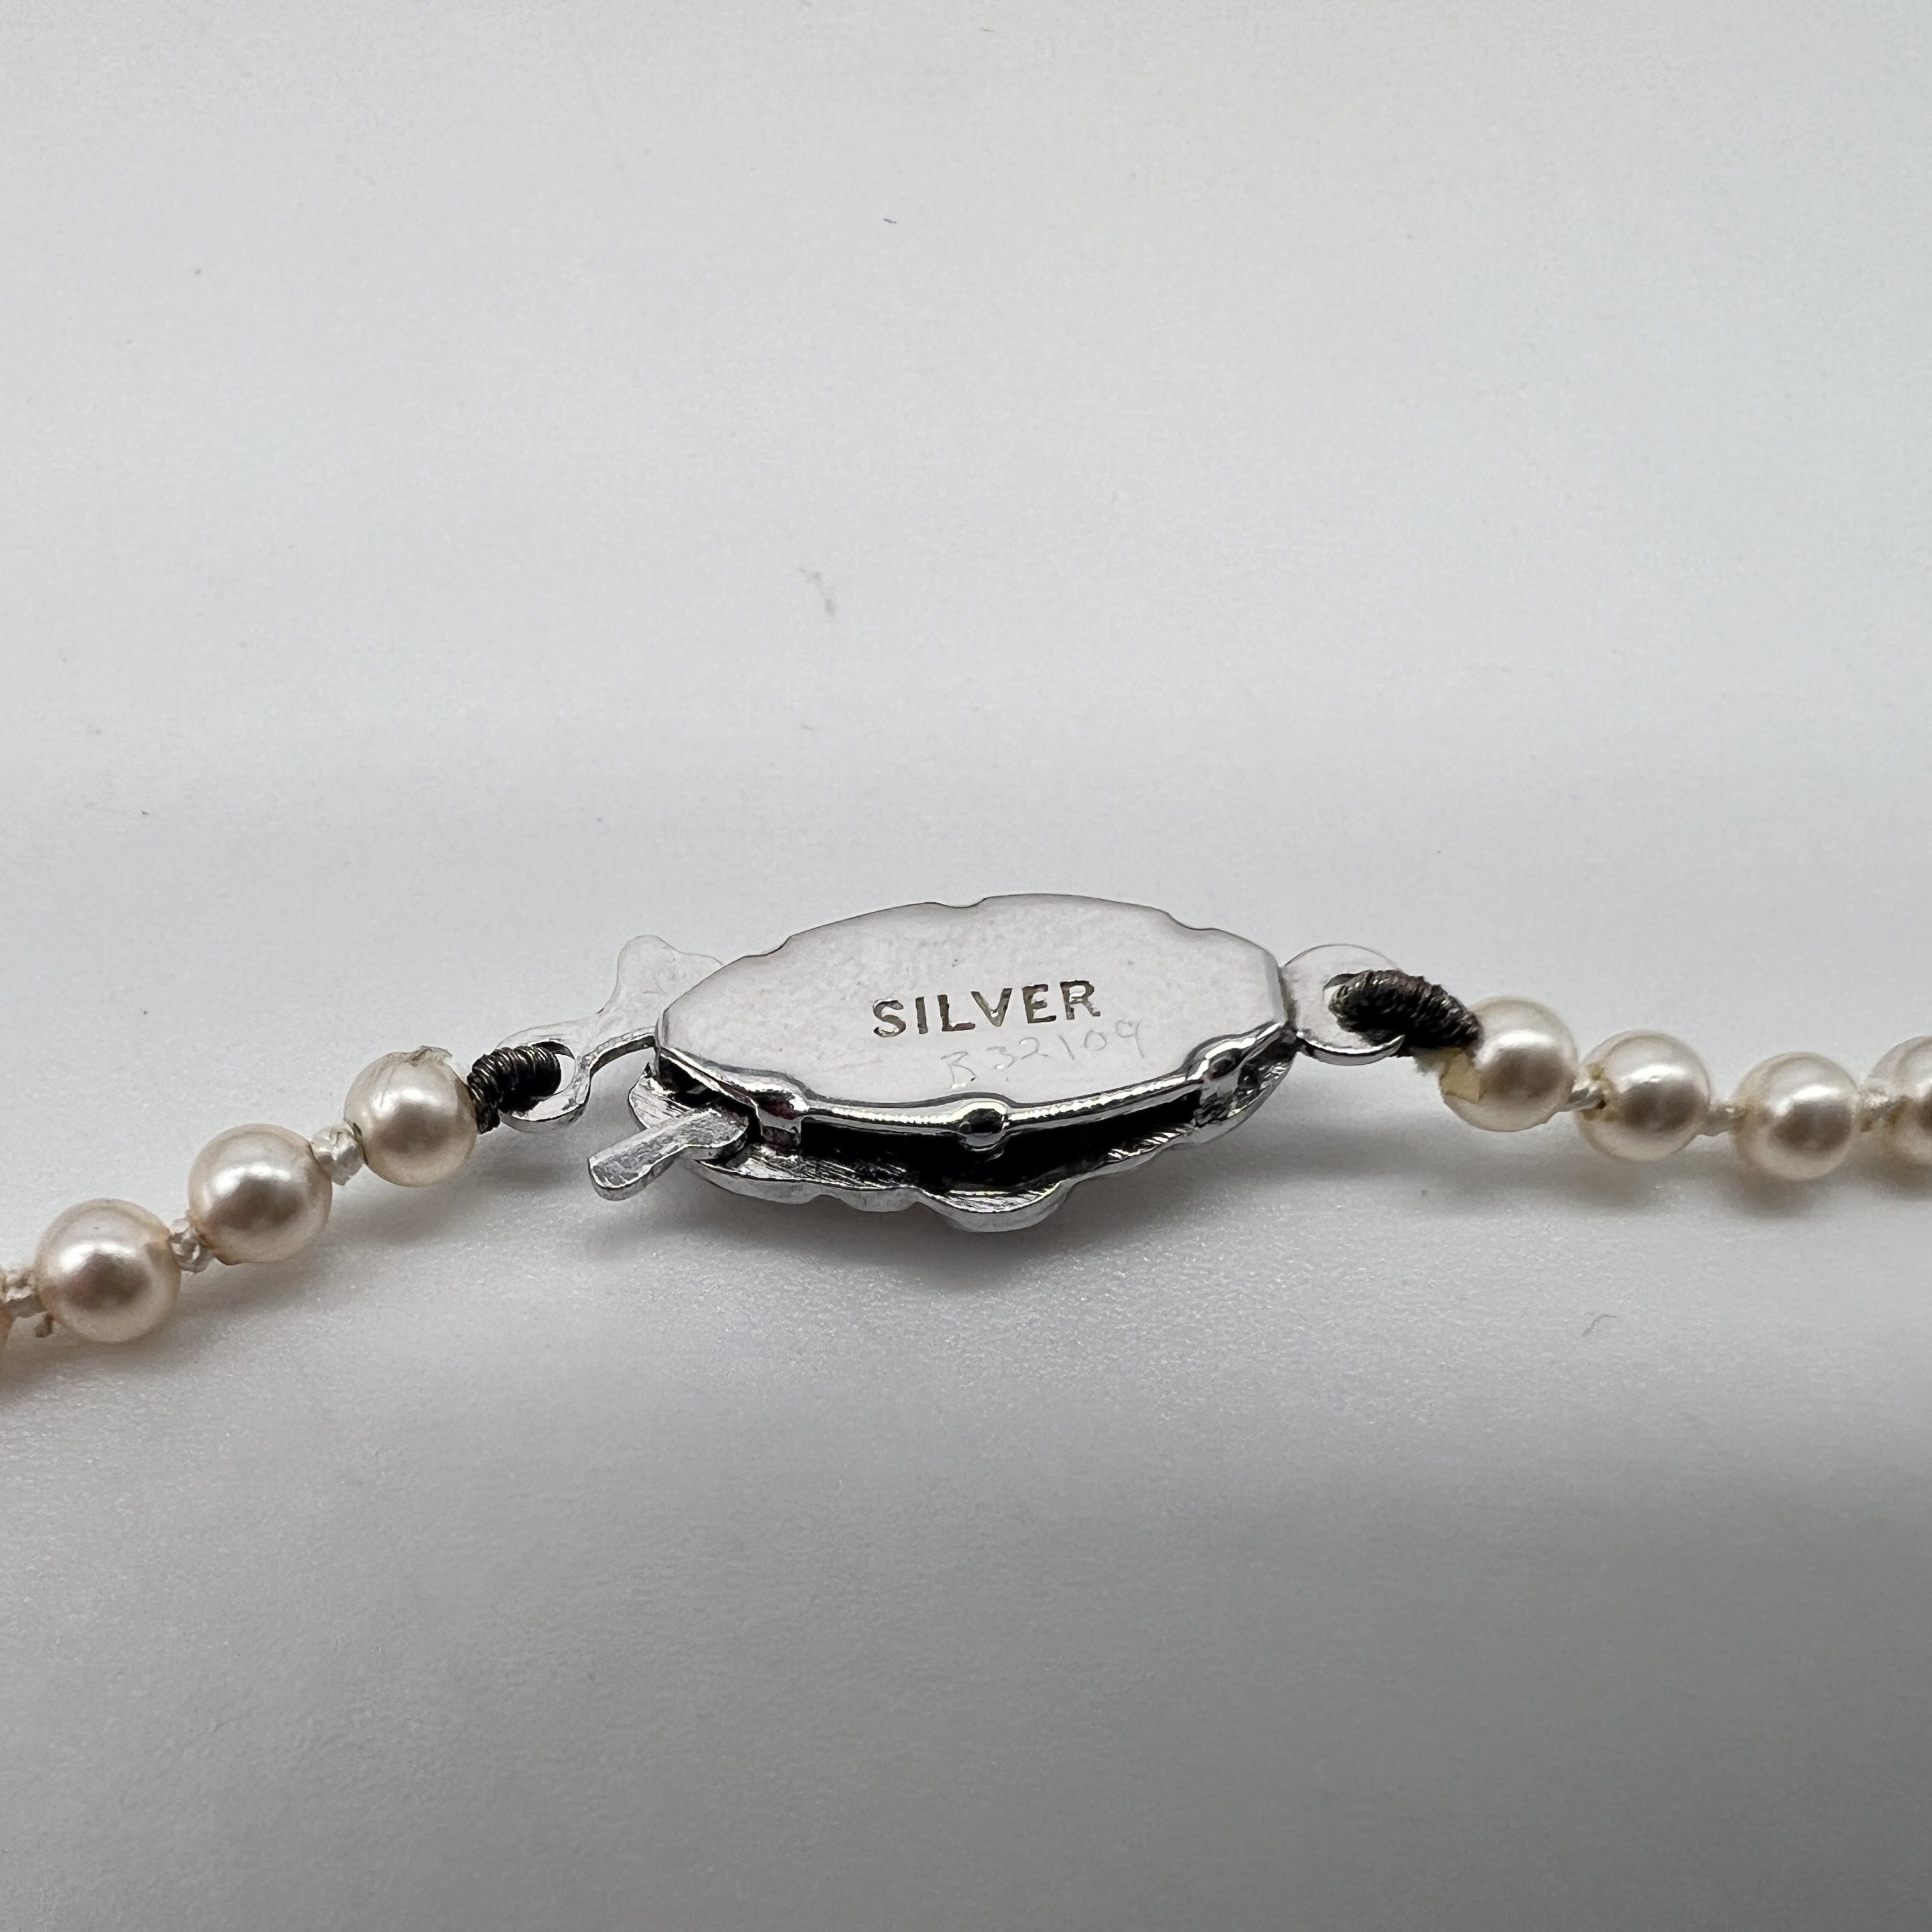 A silver clasp synthetic pearl necklace - Image 3 of 4